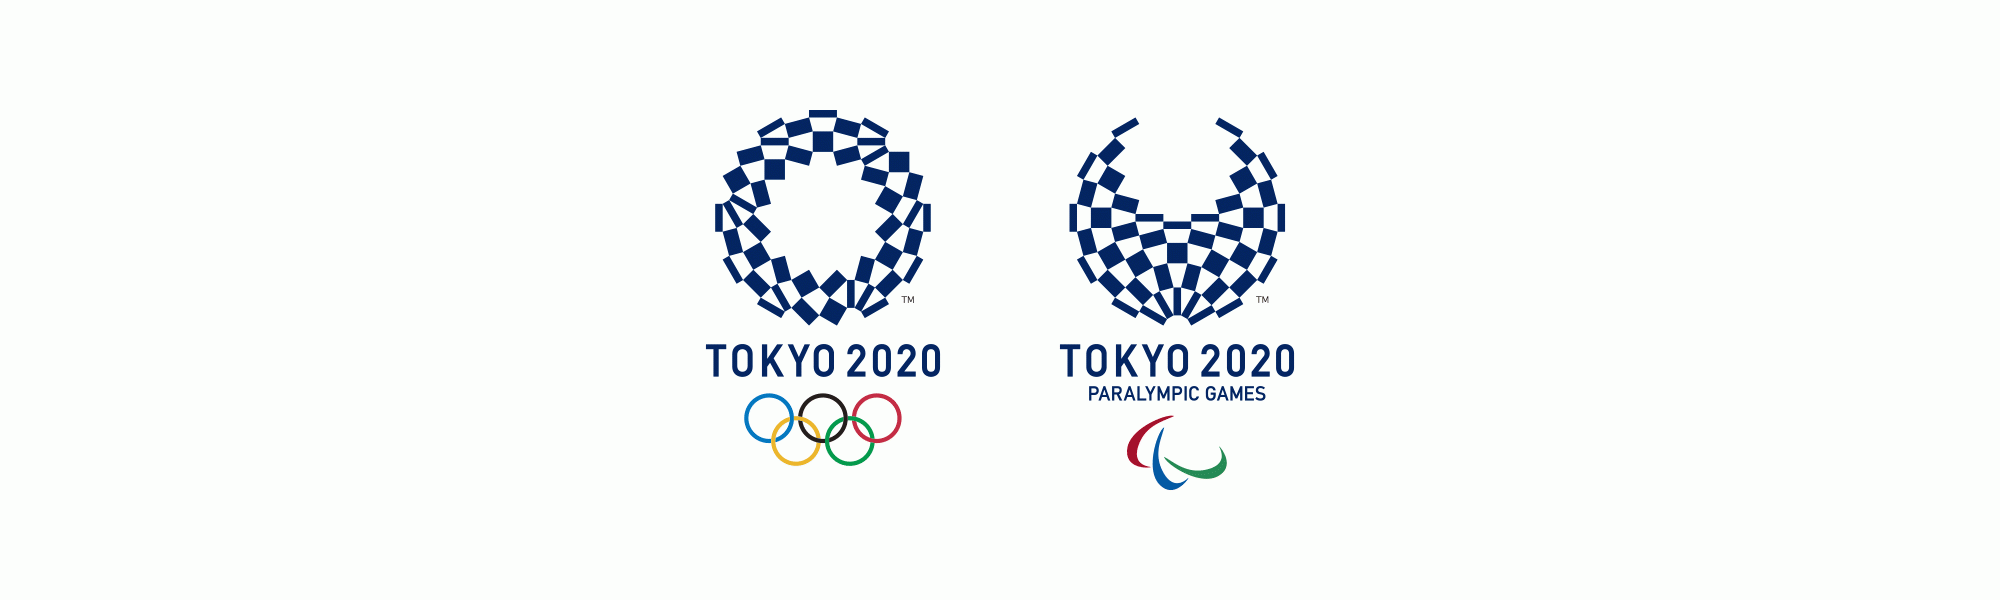 Tokyo 2020 Olympic Games (in 2021)